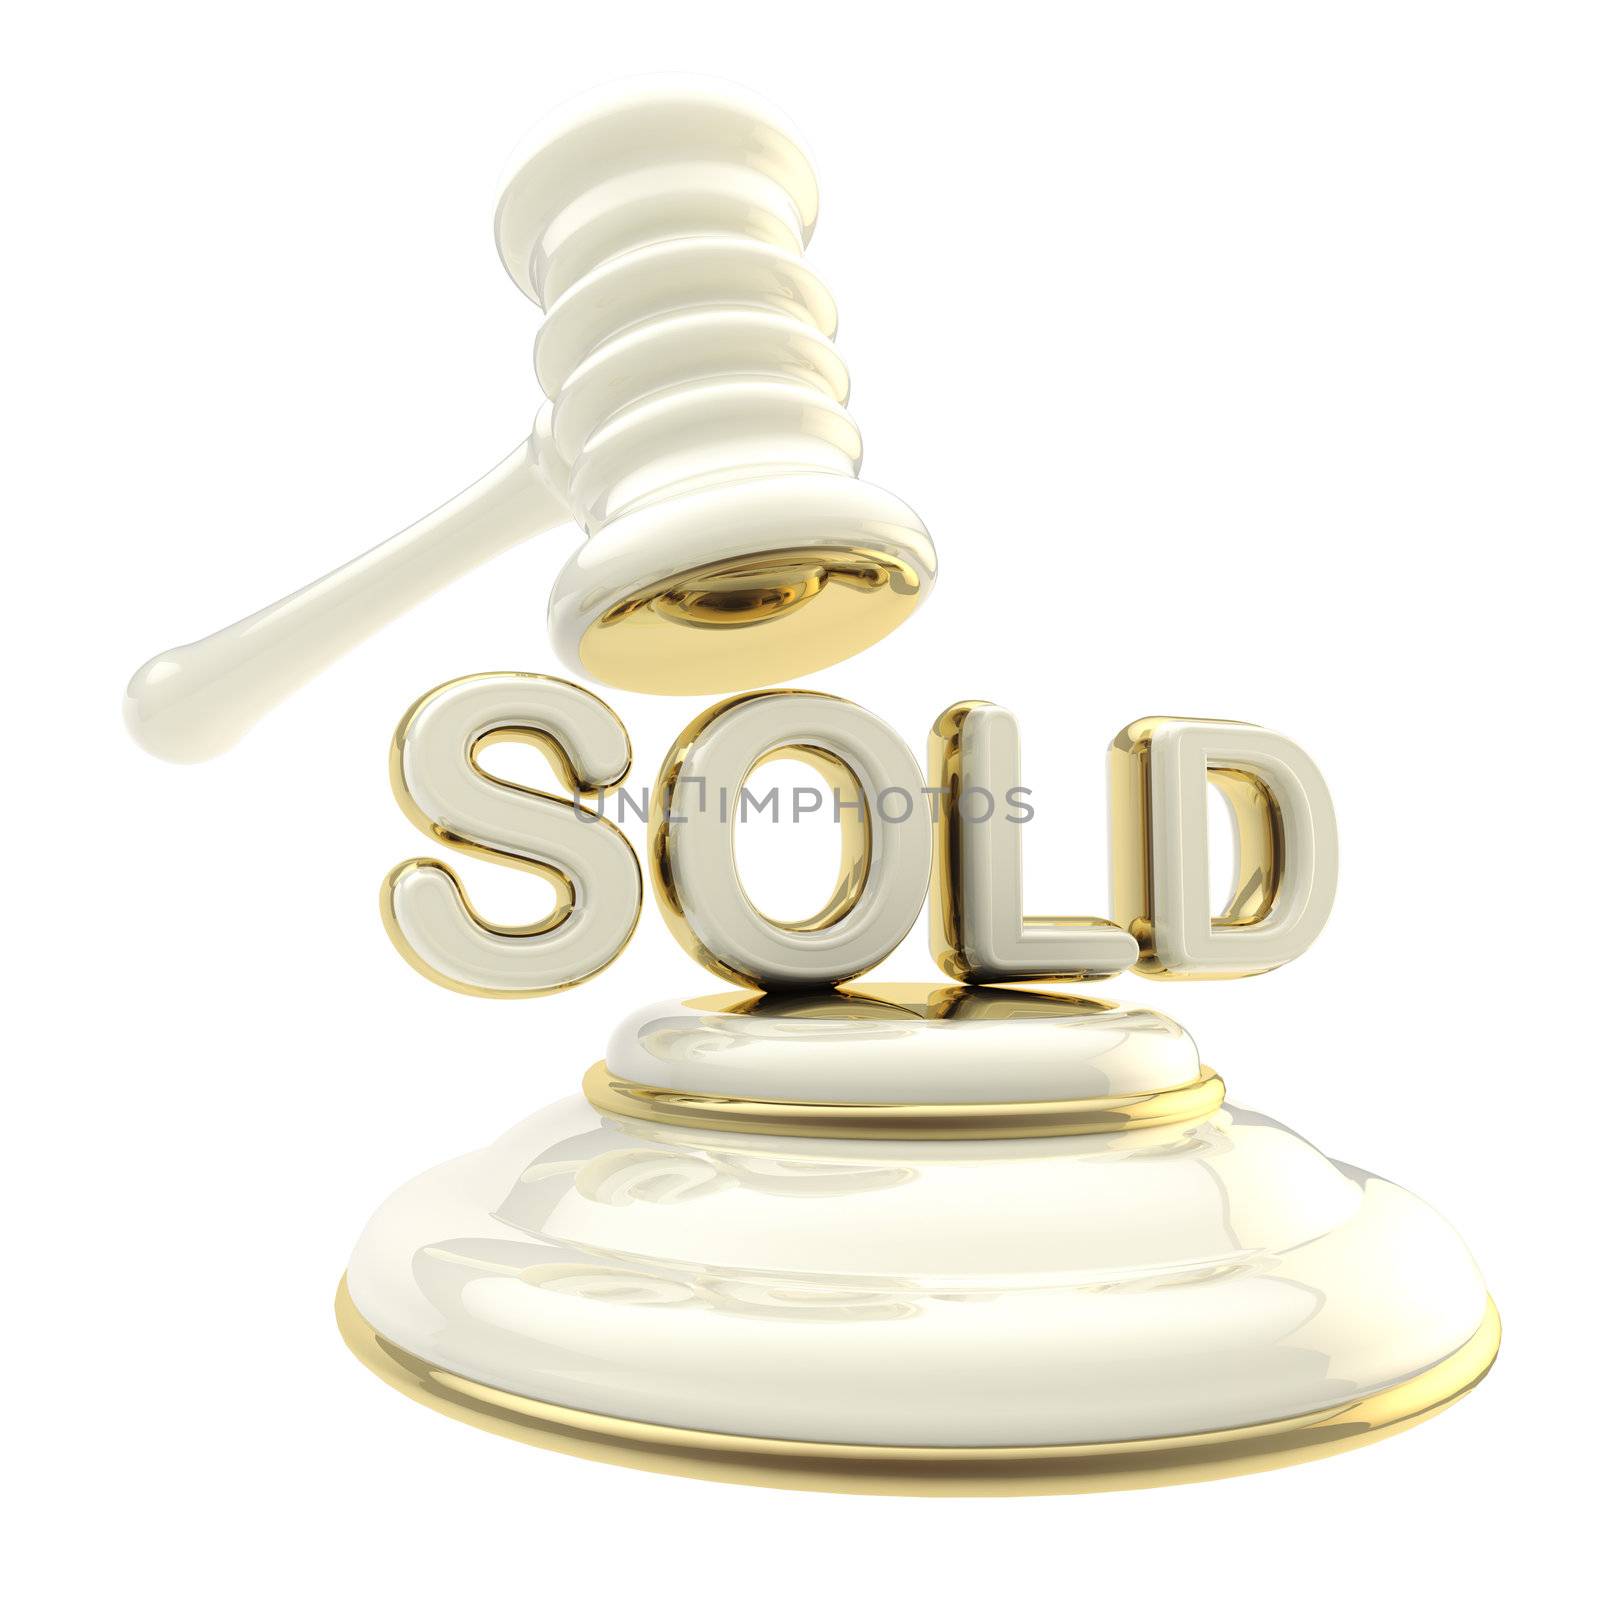 Auction: word "sold" under golden gavel by nbvf